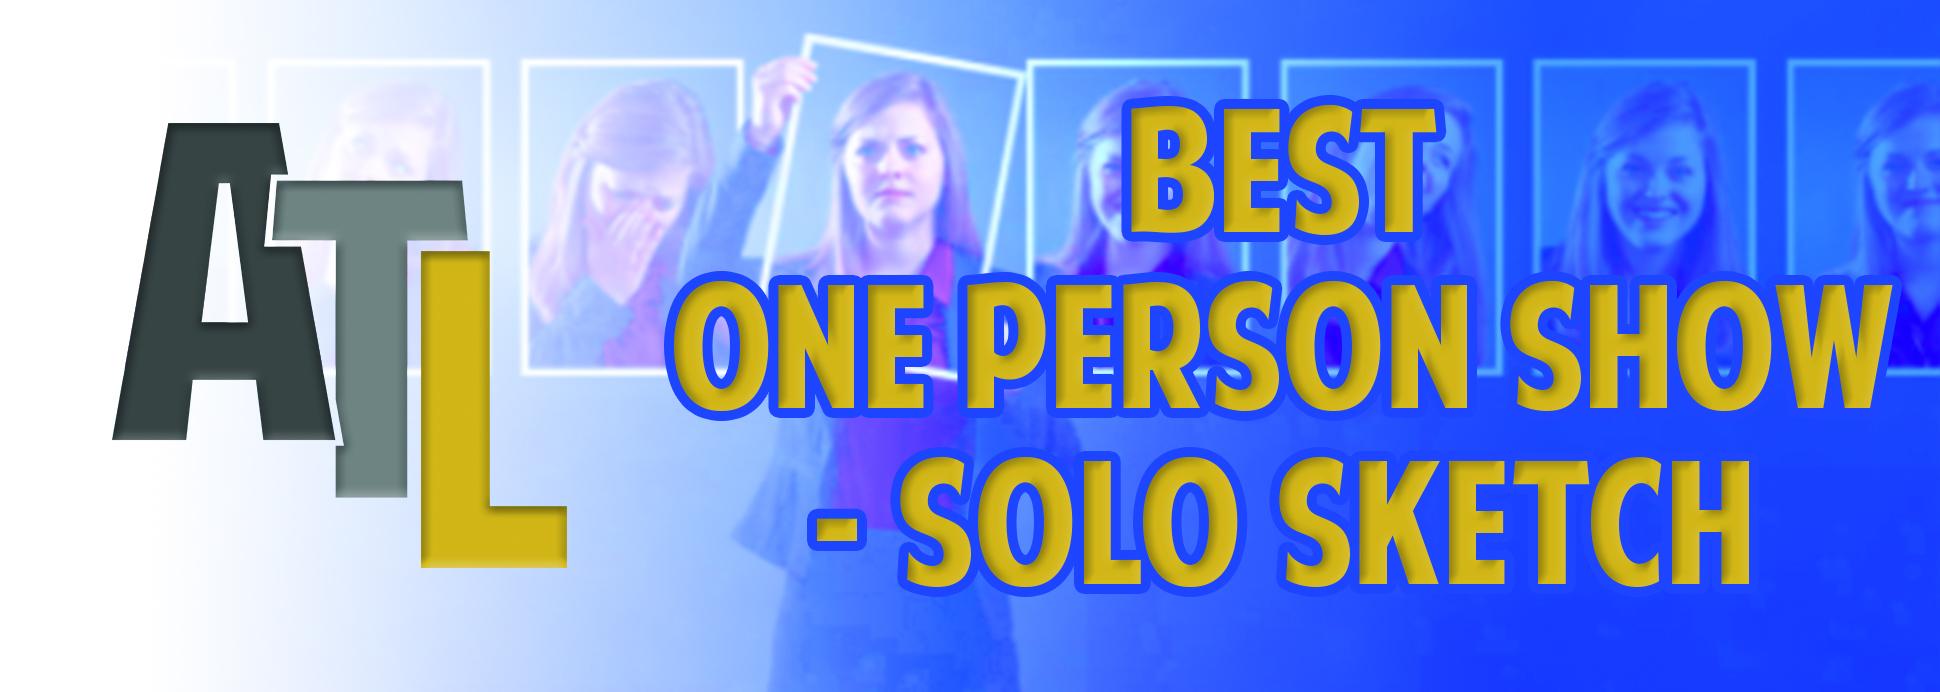 Best One Person Show/Solo Sketch